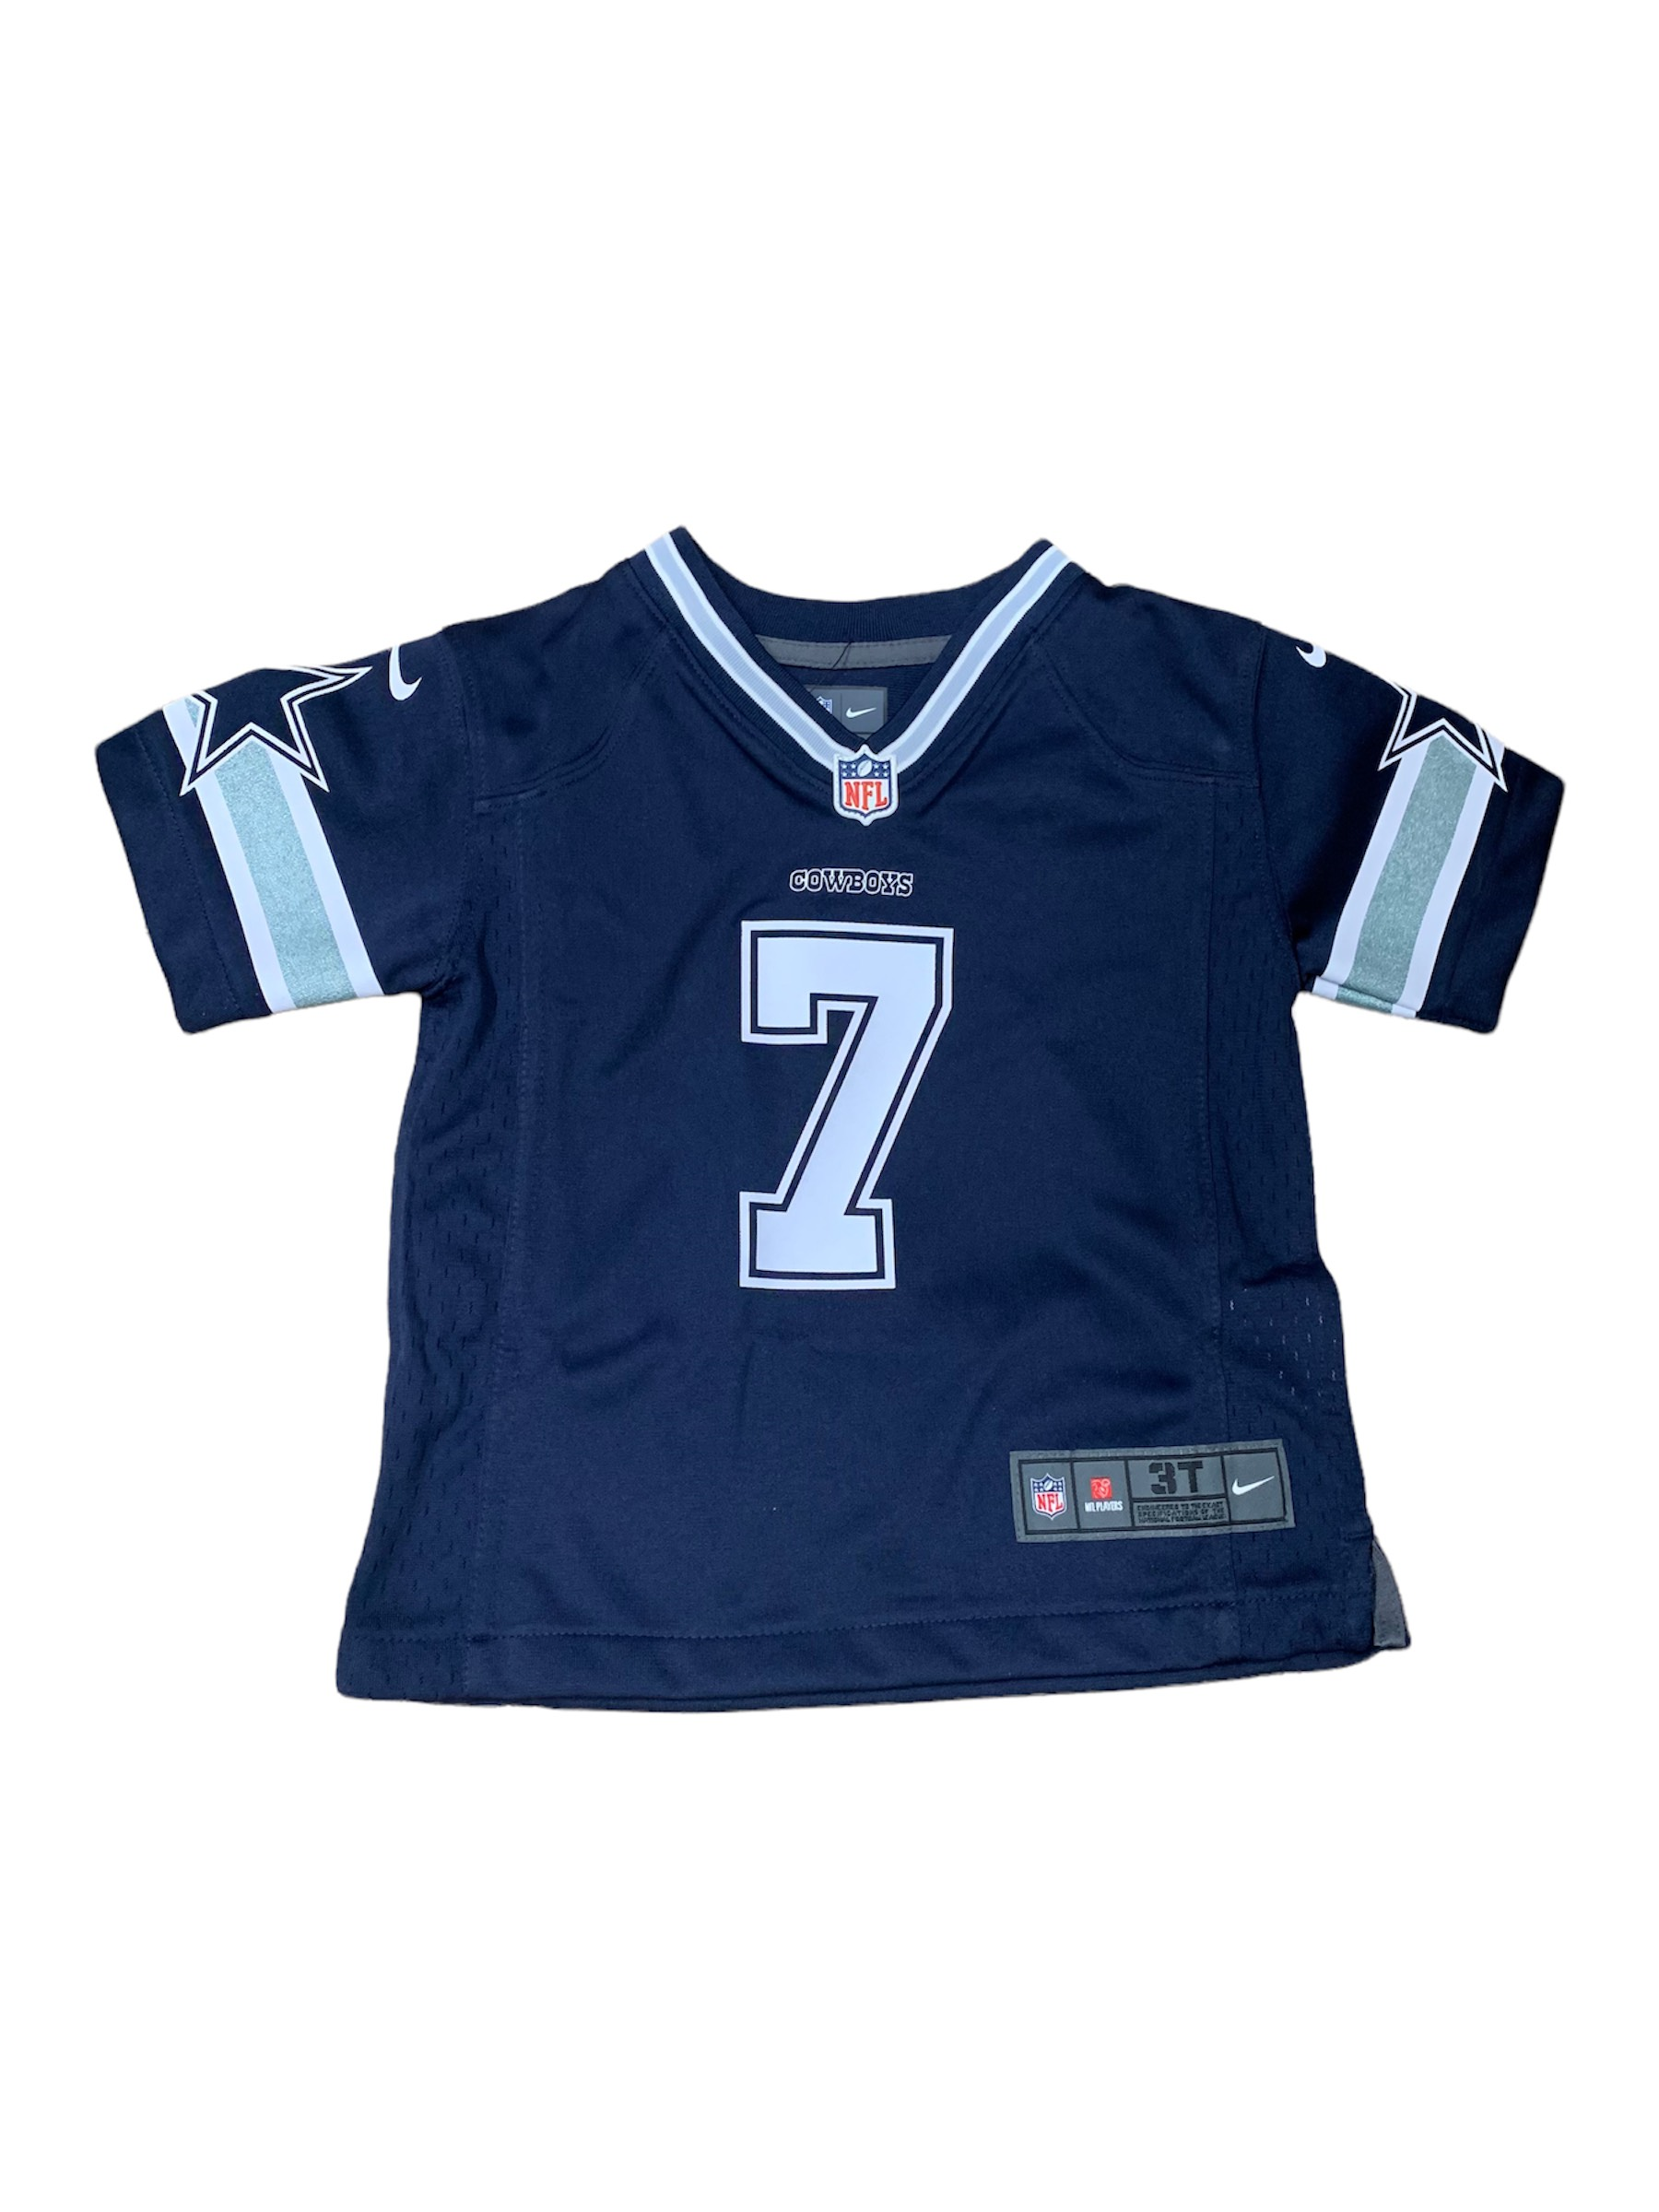 Dallas Cowboys Toddlers Trevon Diggs Game Jersey - Navy Blue / 2T